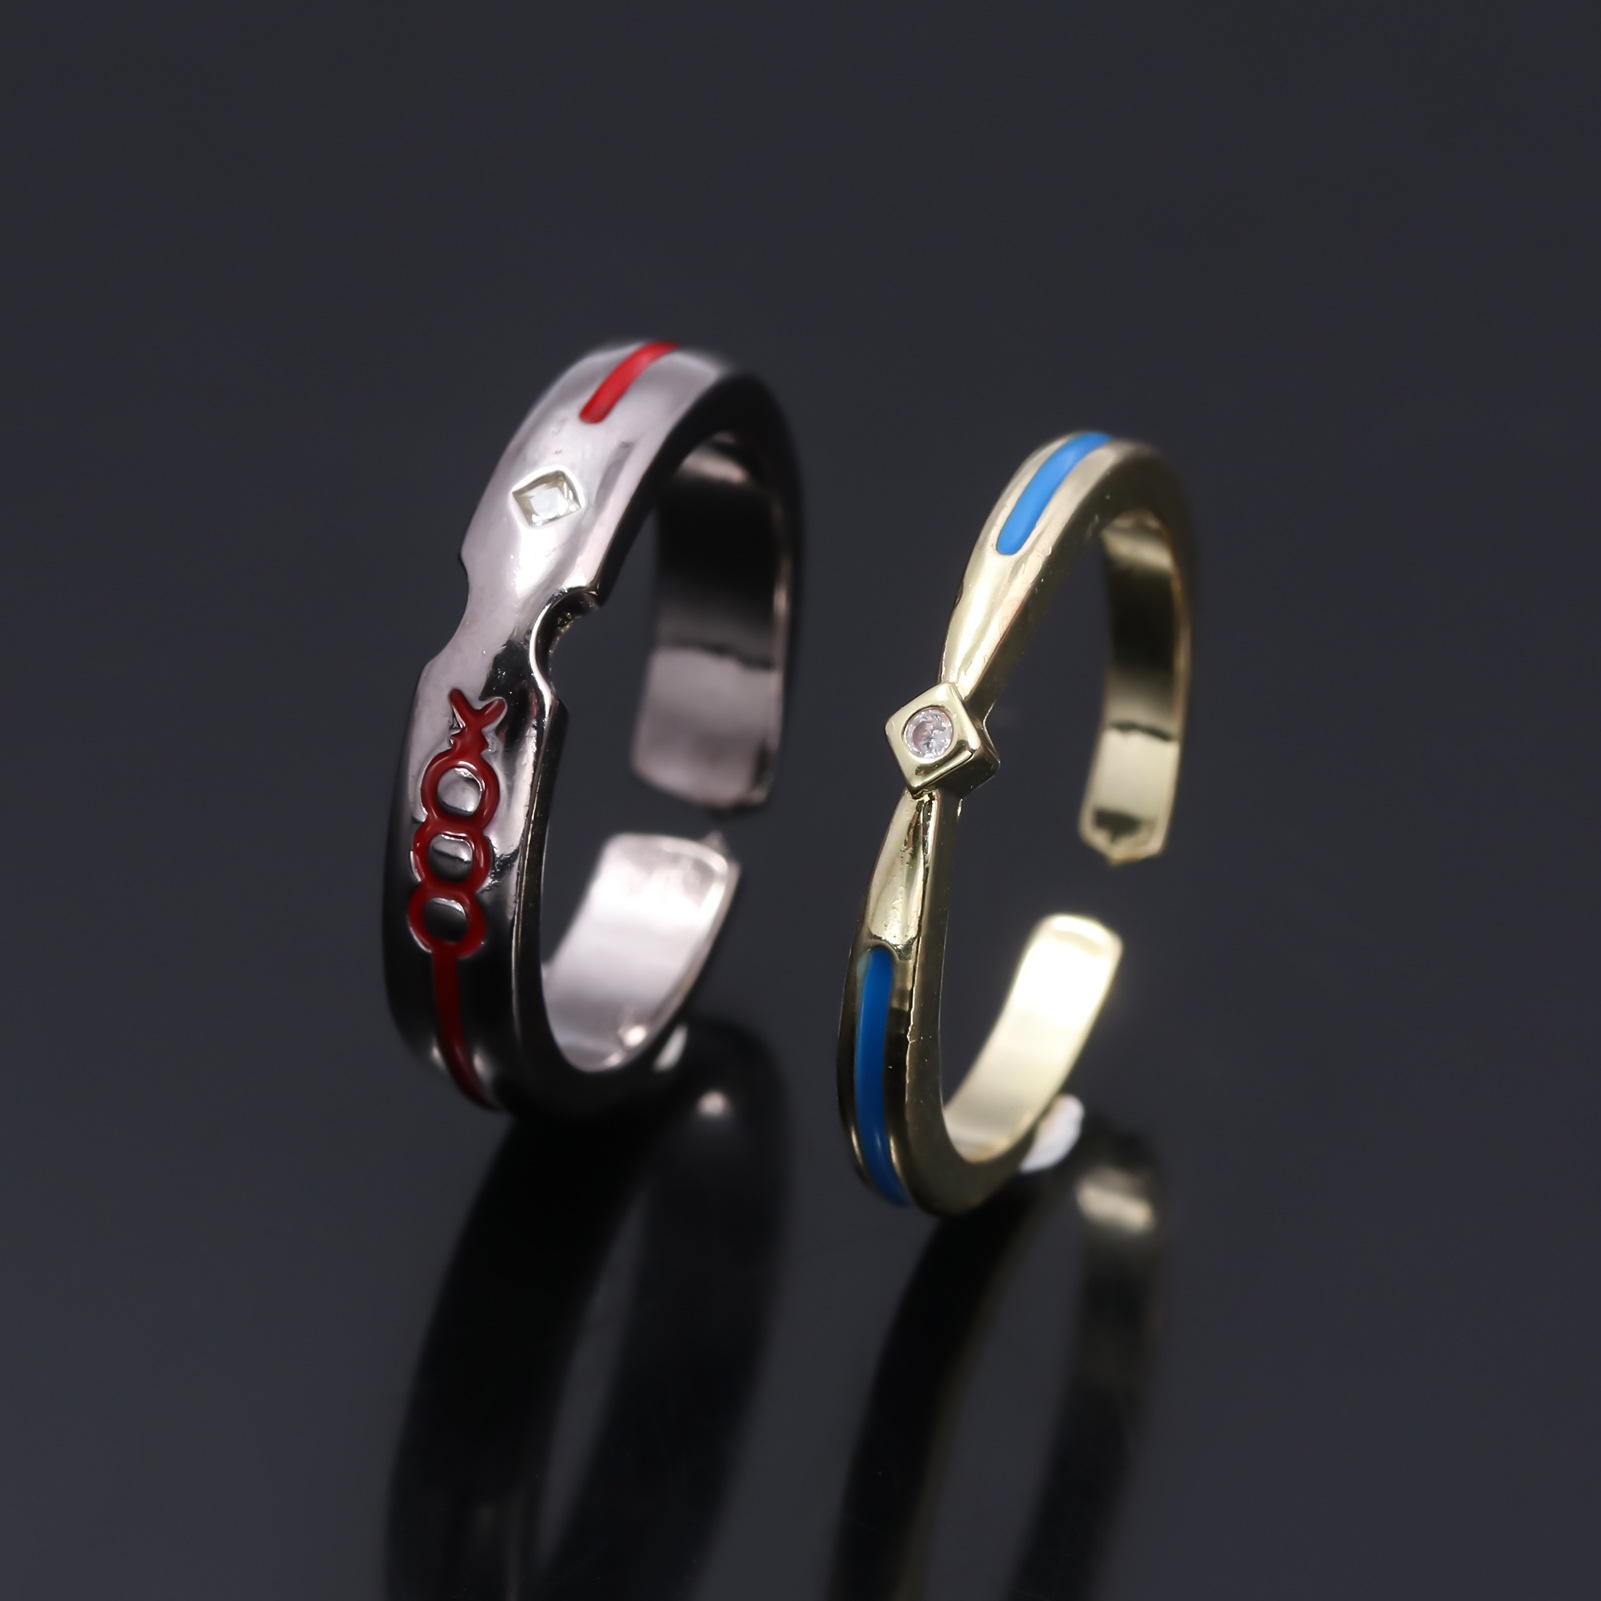 Fate anime ring